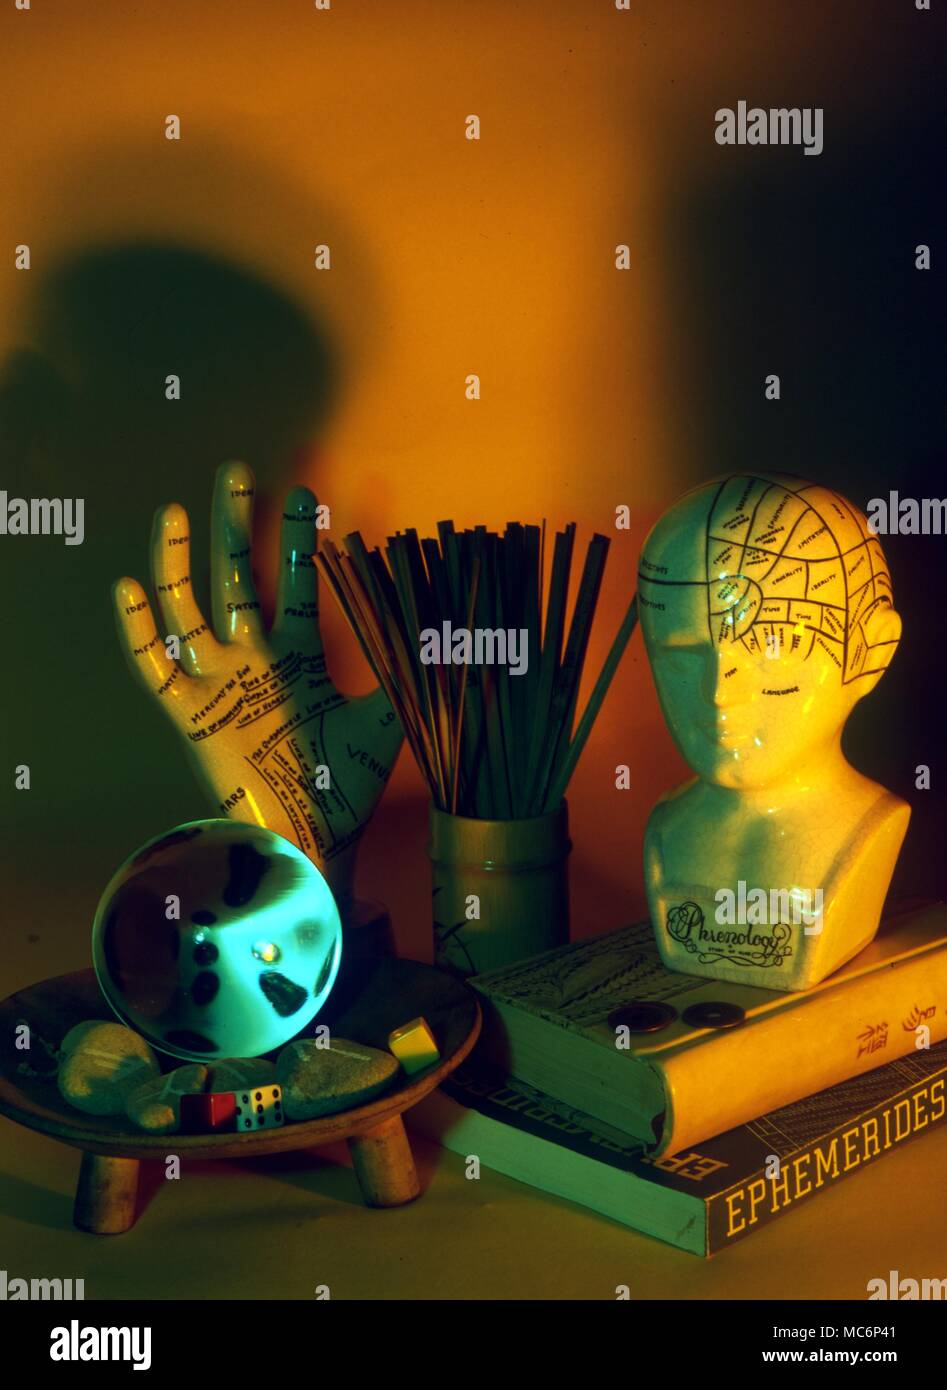 Various implements used in divination including I Ching sticks, a phrenology bust, a palmistry model, astrological books, dice, crystal, and so on. 2004 Charles Walker / Stock Photo